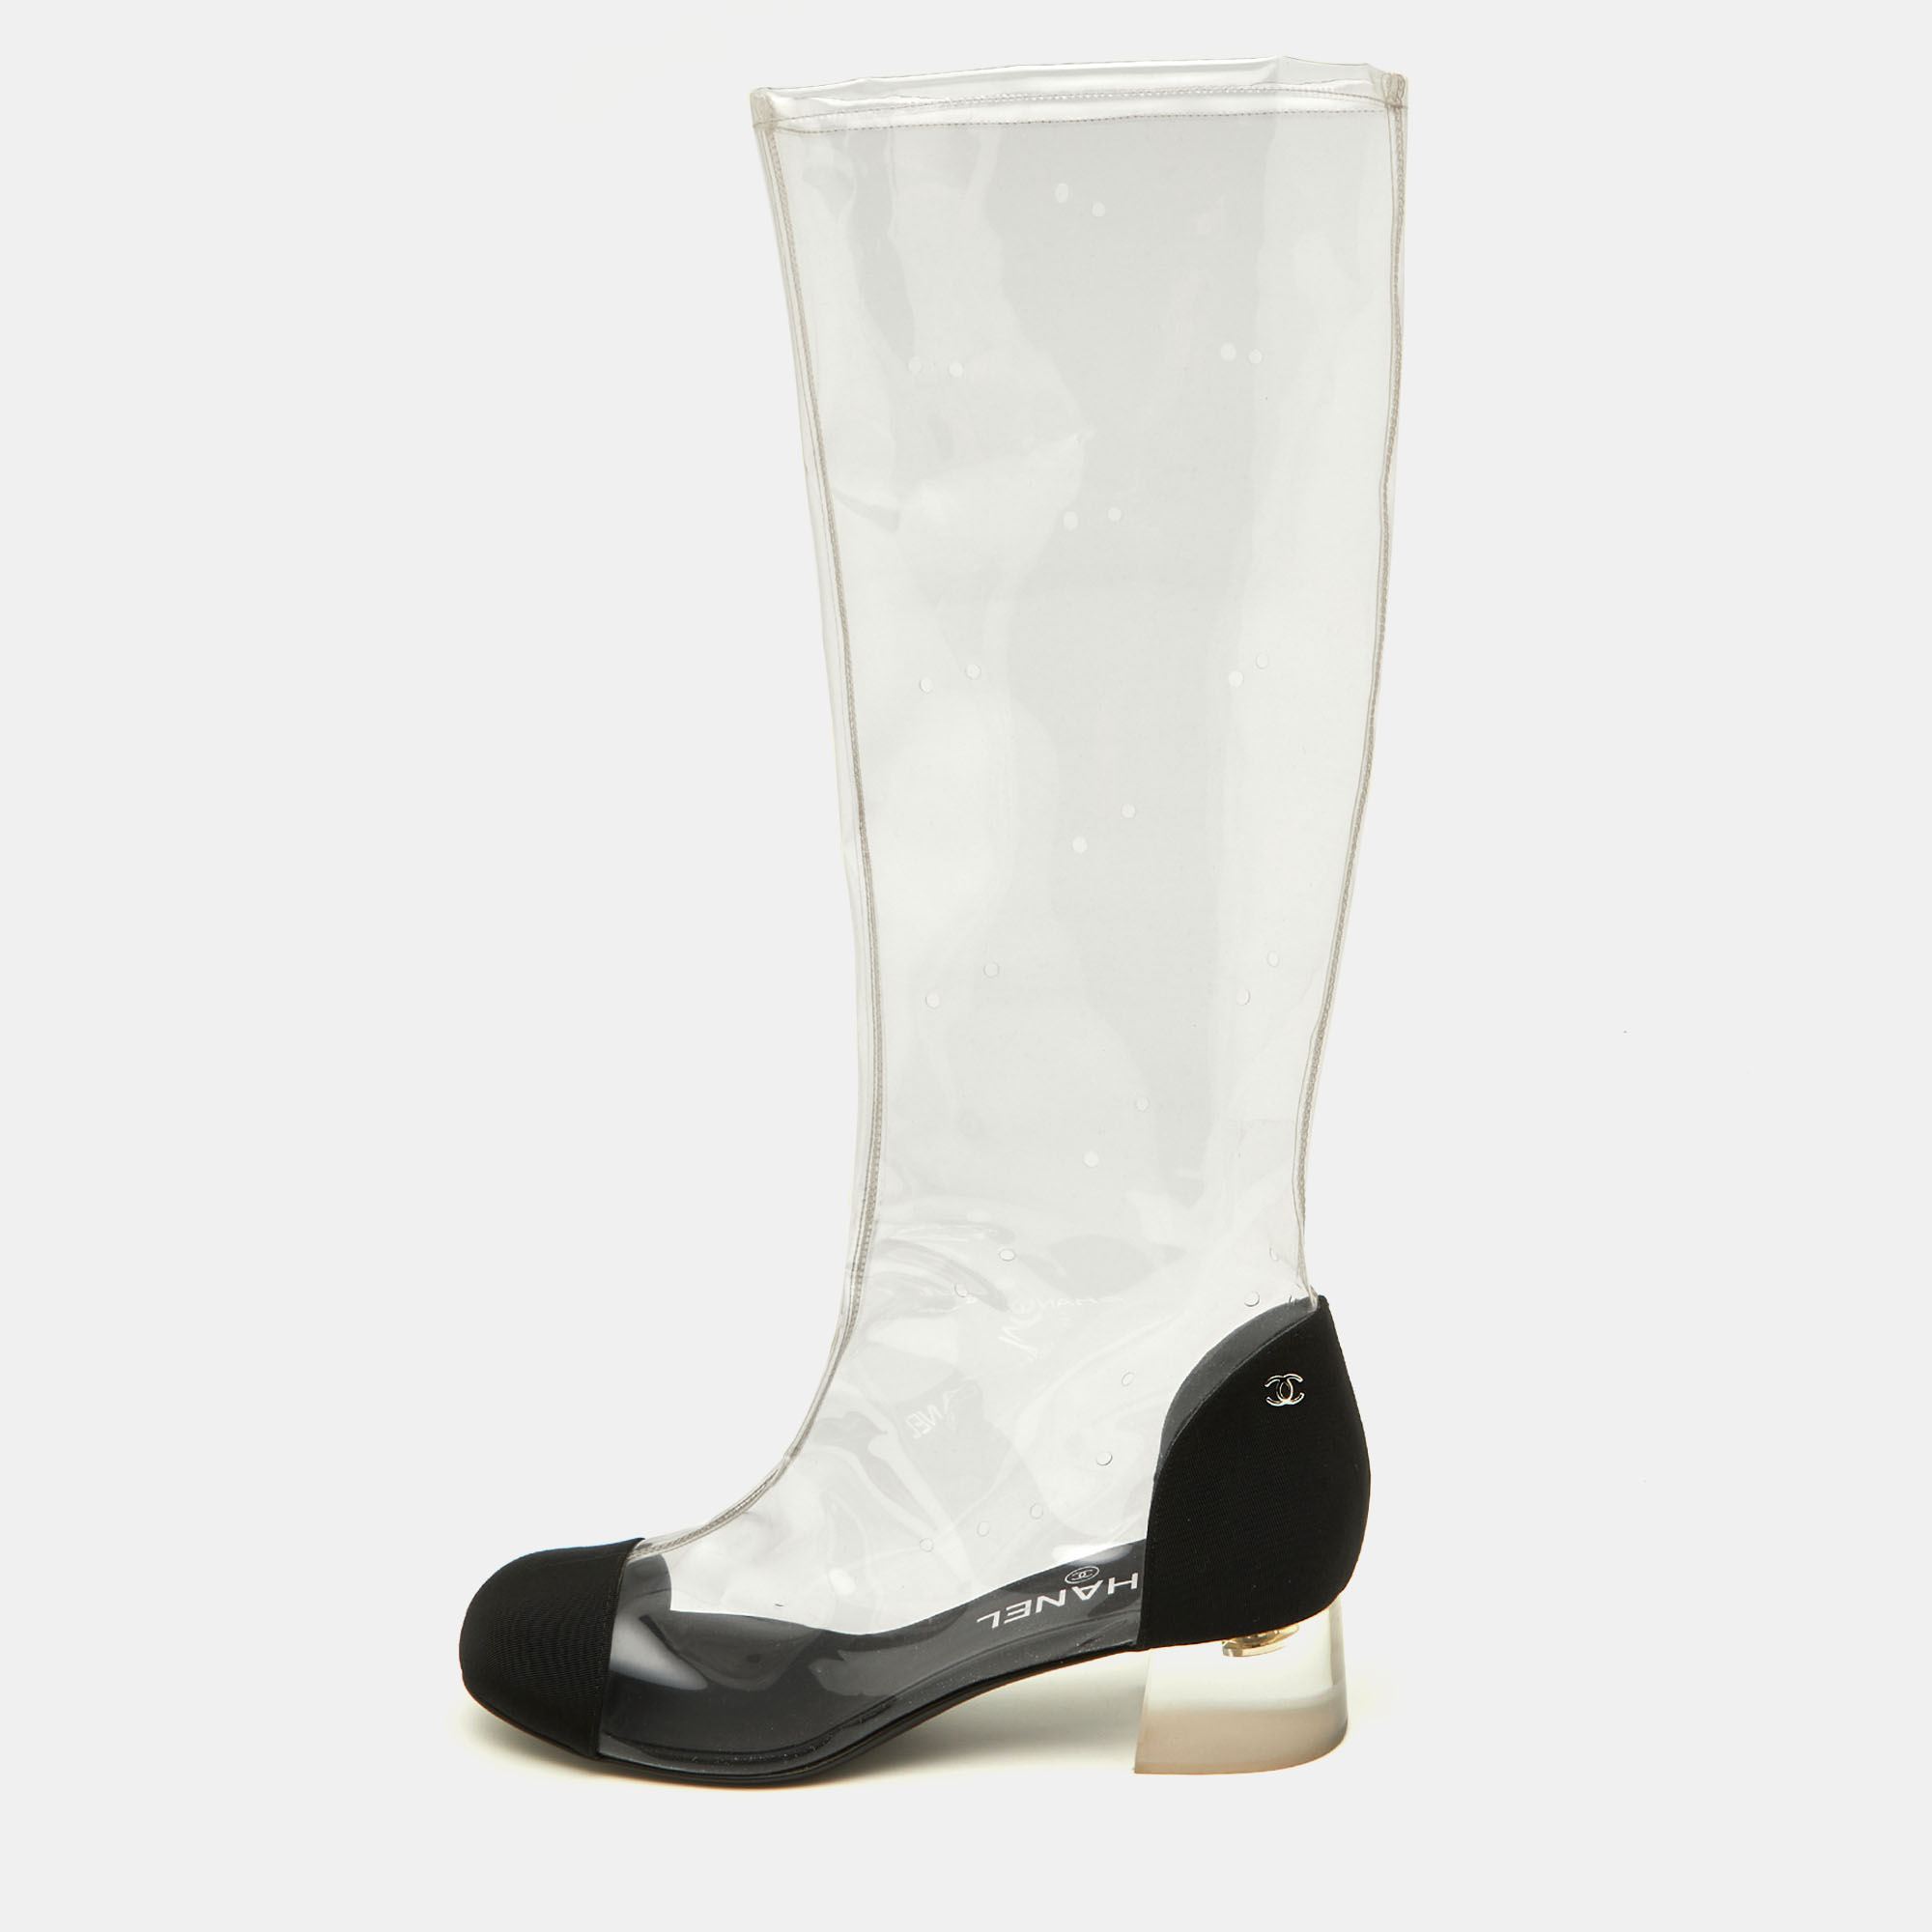 Chanel transparent/black pvc and grosgrain knee high boots size 38.5